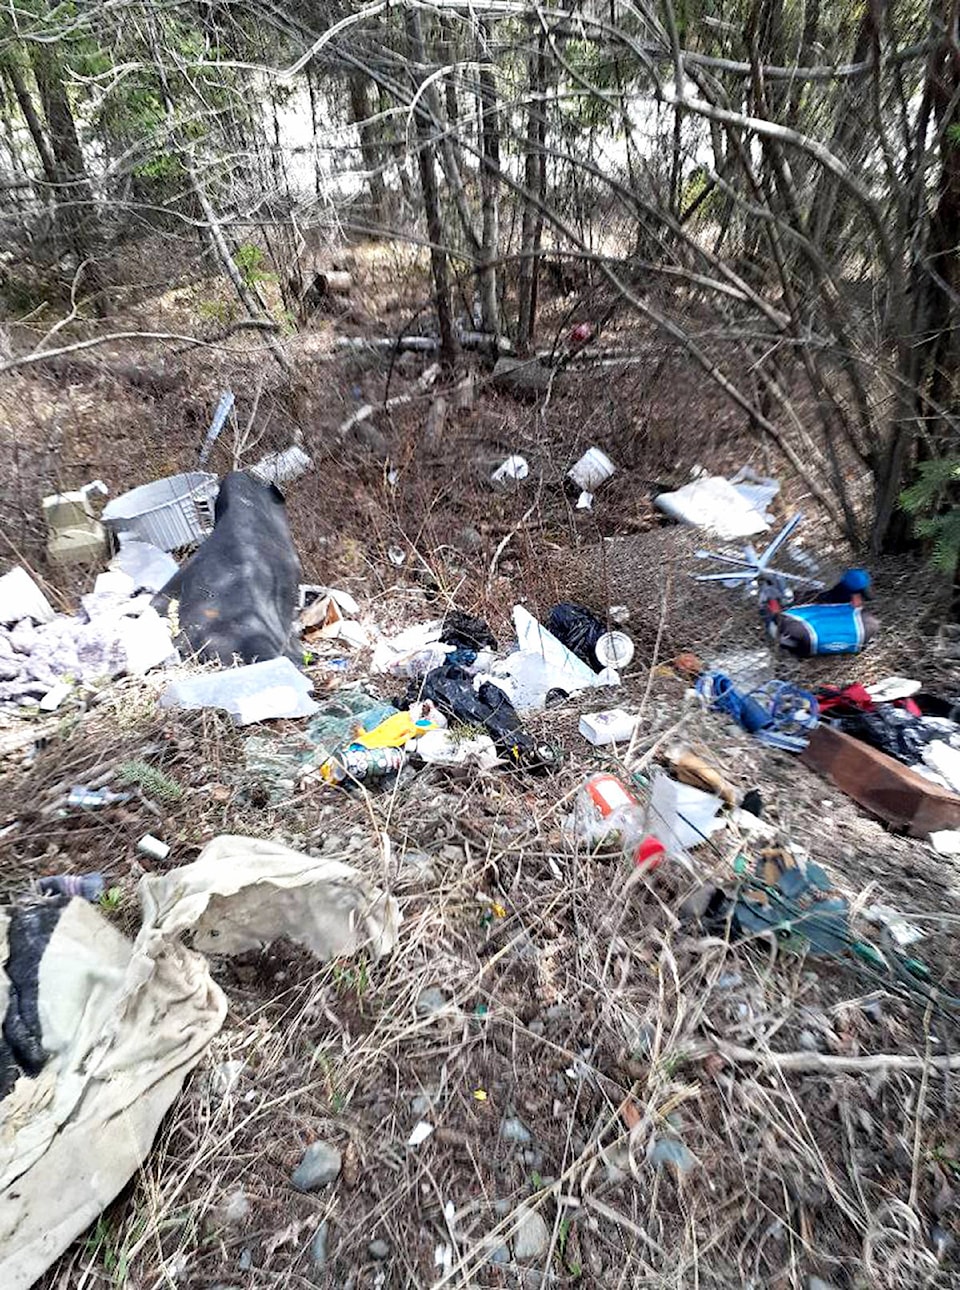 24762672_web1_210408-NTS-Editorial-Illegal-Dumping-Barriere_1